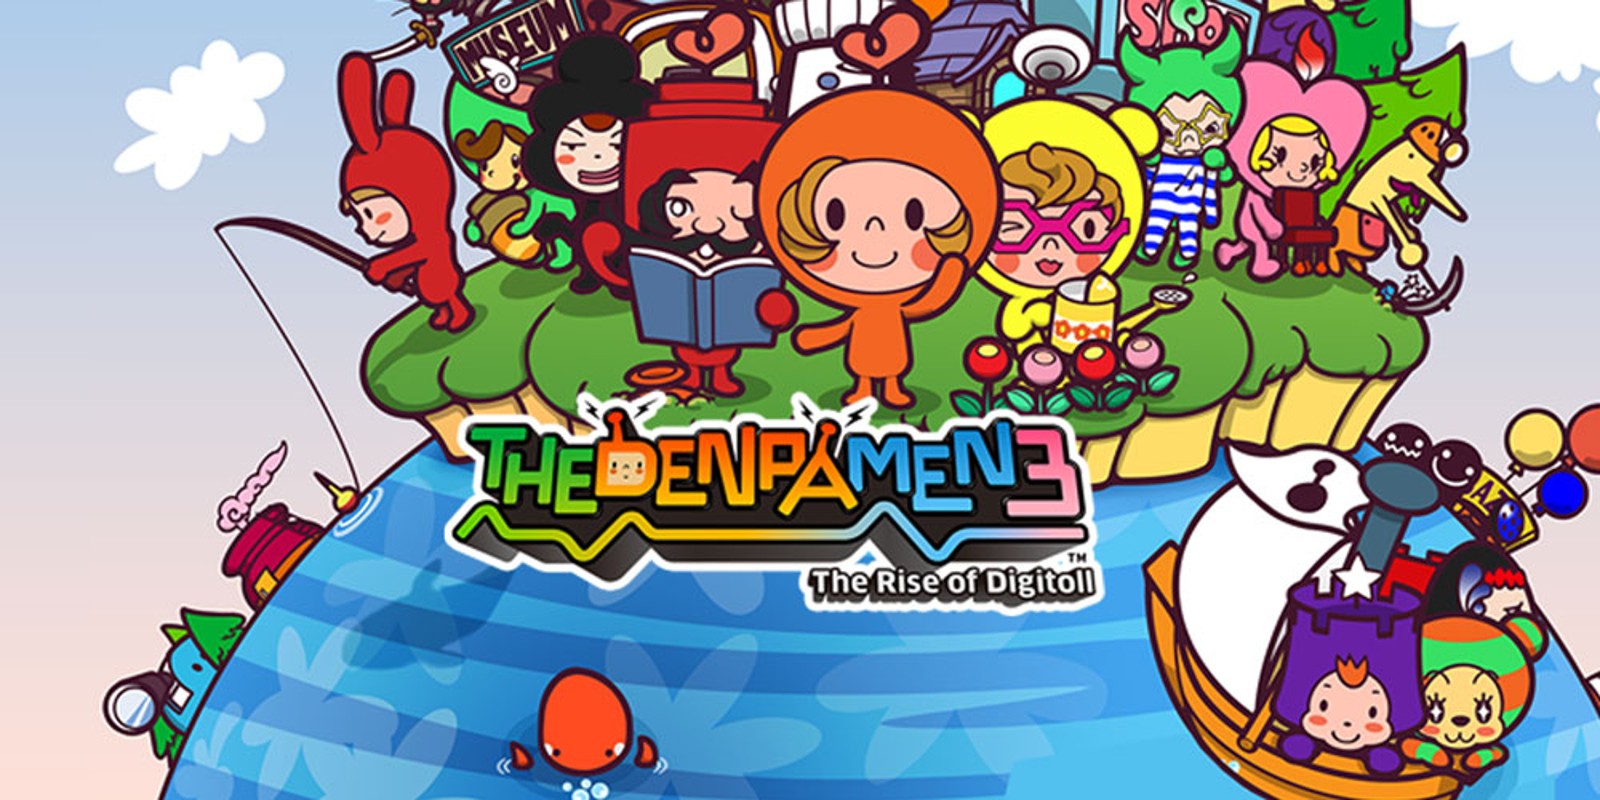 New Release: The Denpa Men 3: The Rise of Digitoll